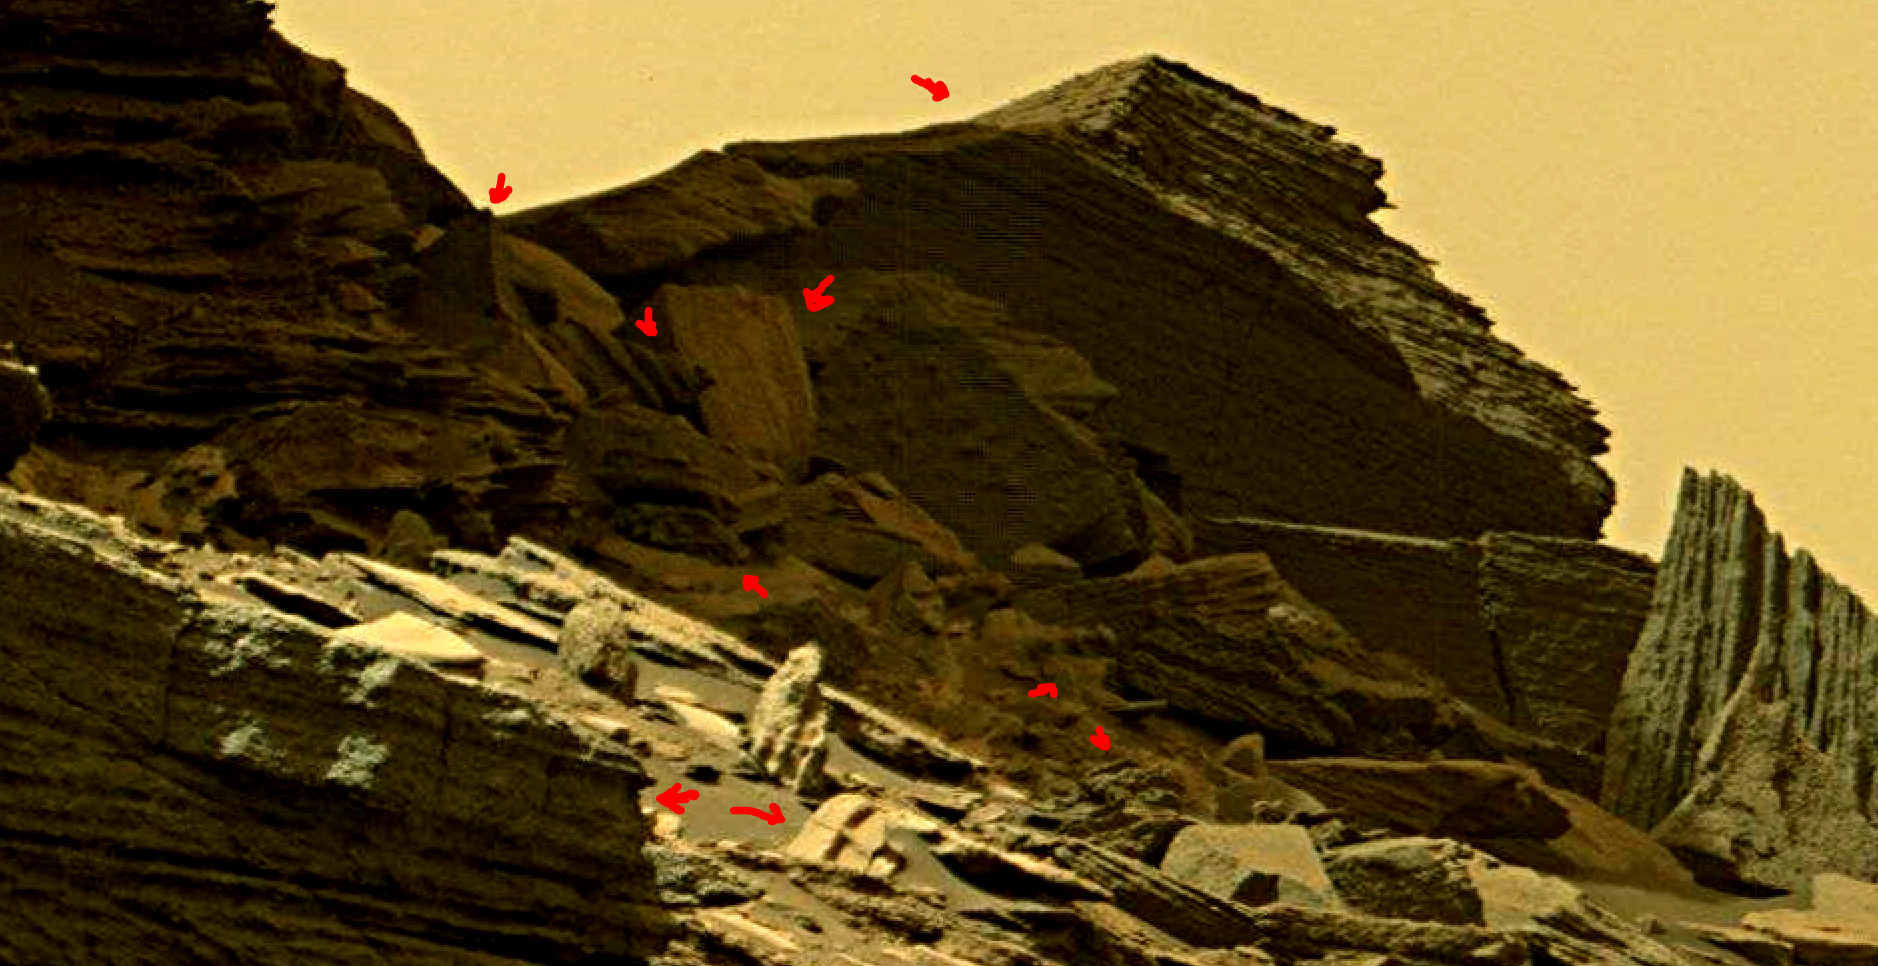 mars-sol-1467-anomaly-artifacts-8-was-life-on-mars